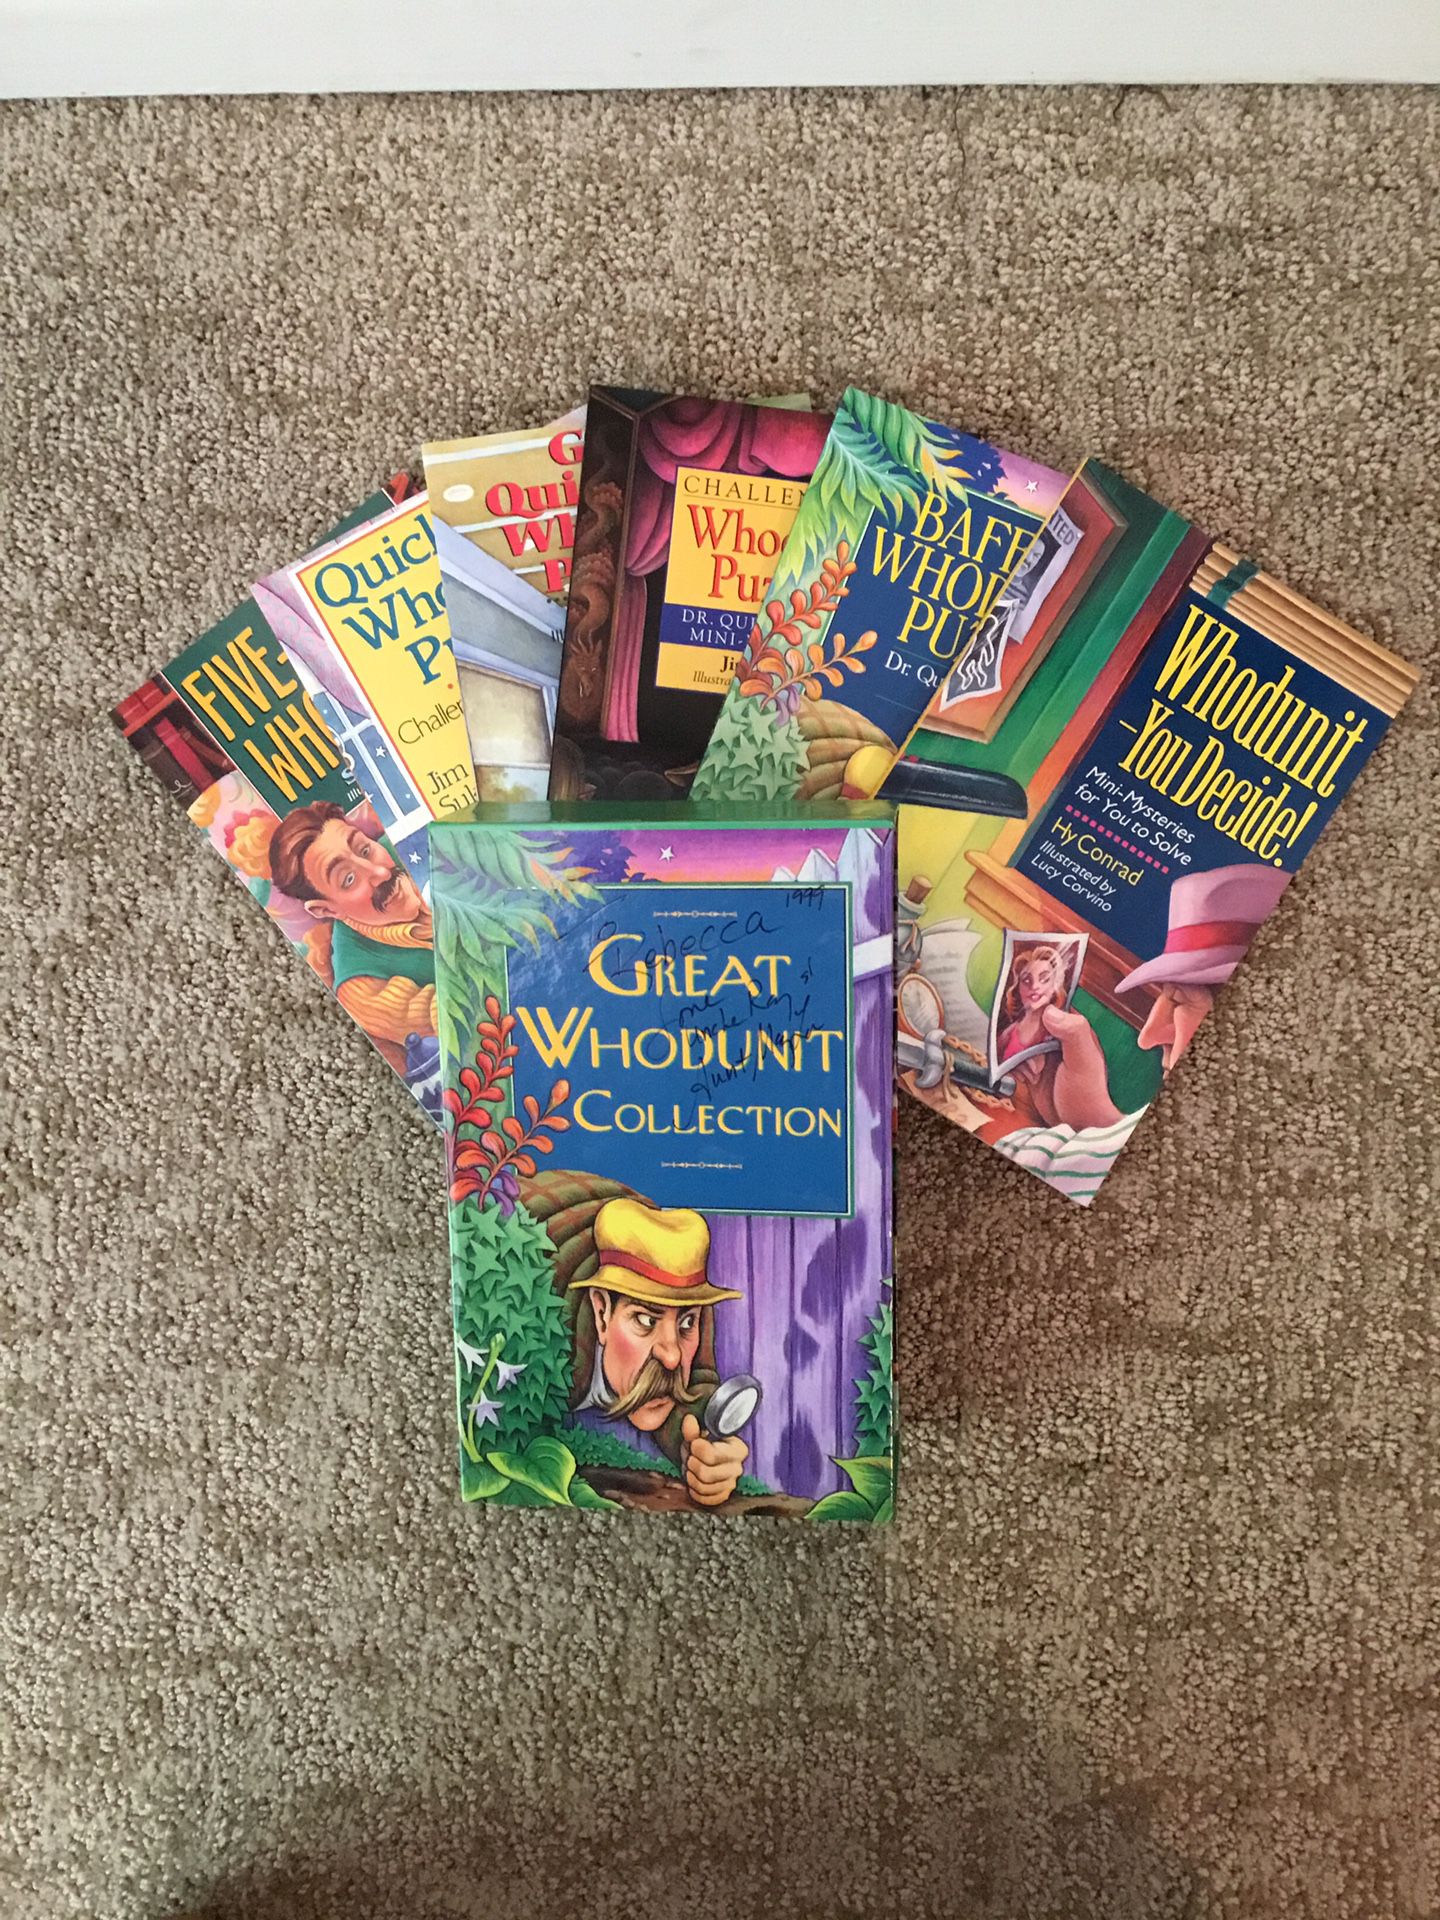 The Great Who Done It Collection